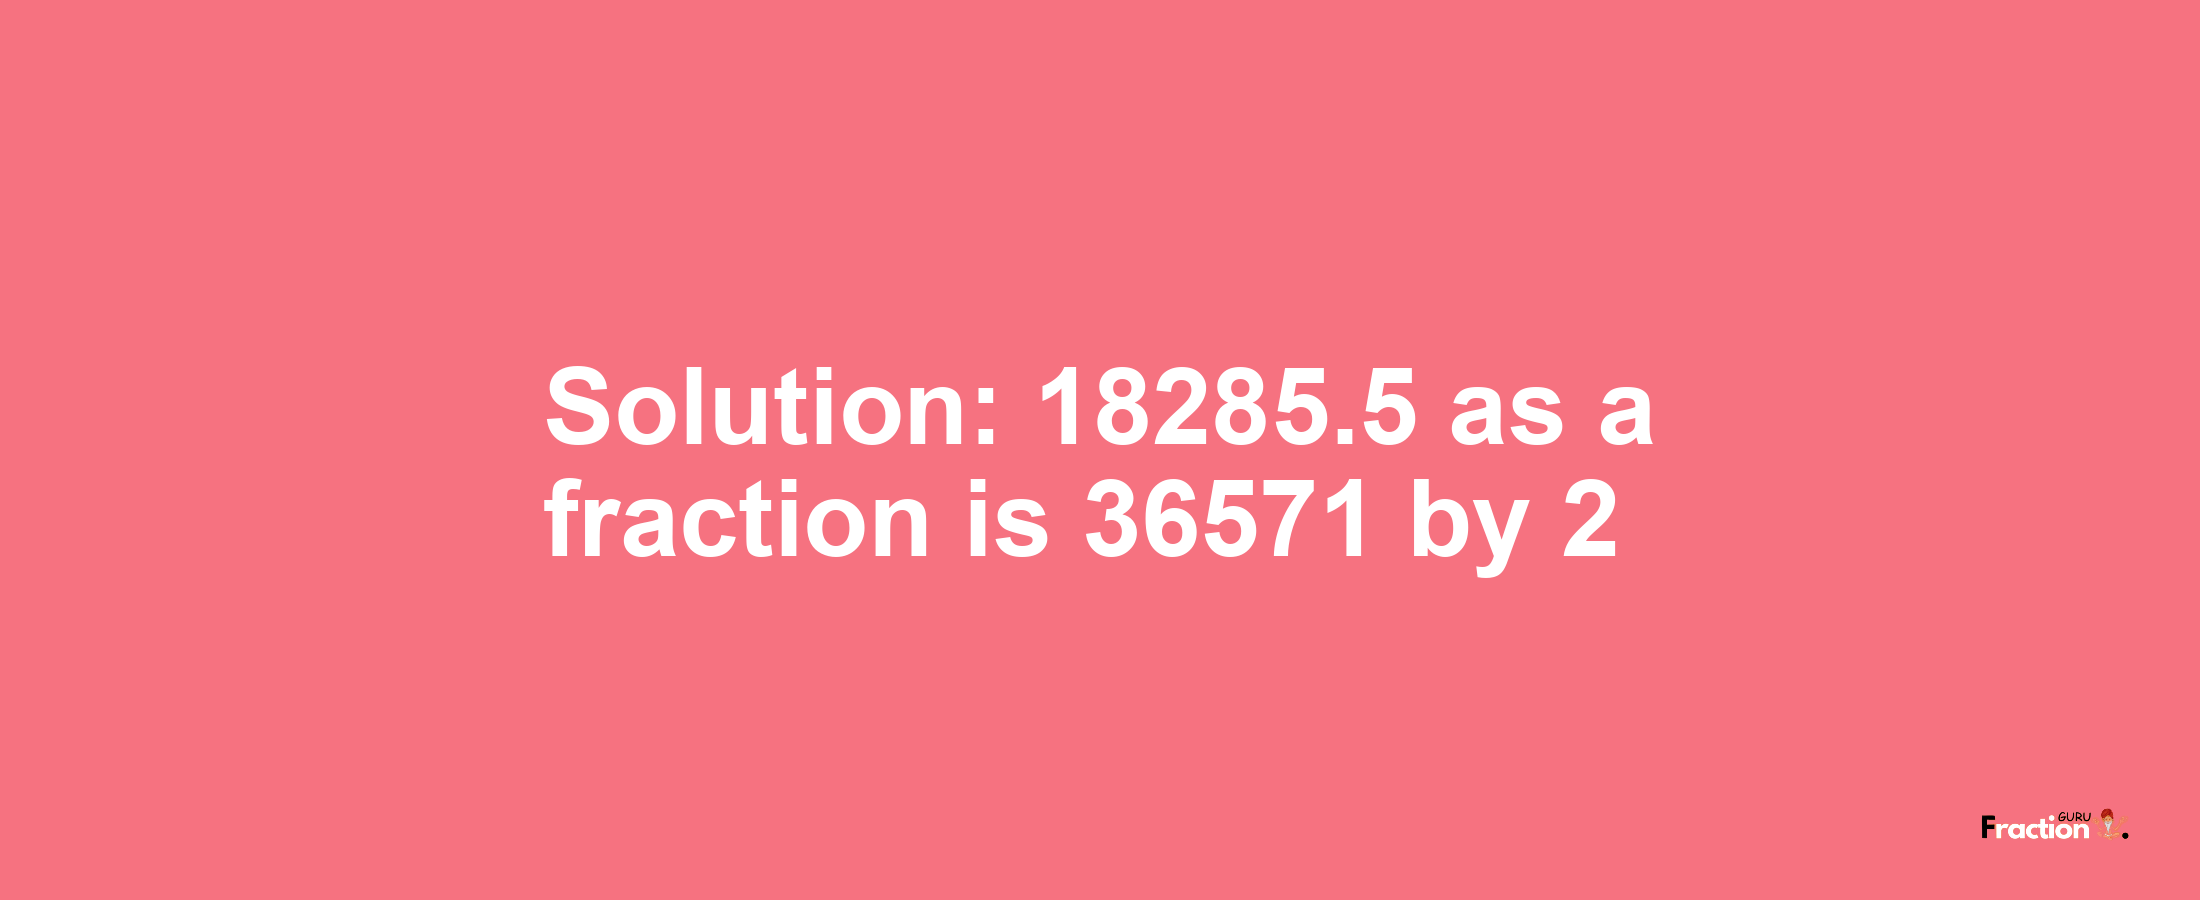 Solution:18285.5 as a fraction is 36571/2